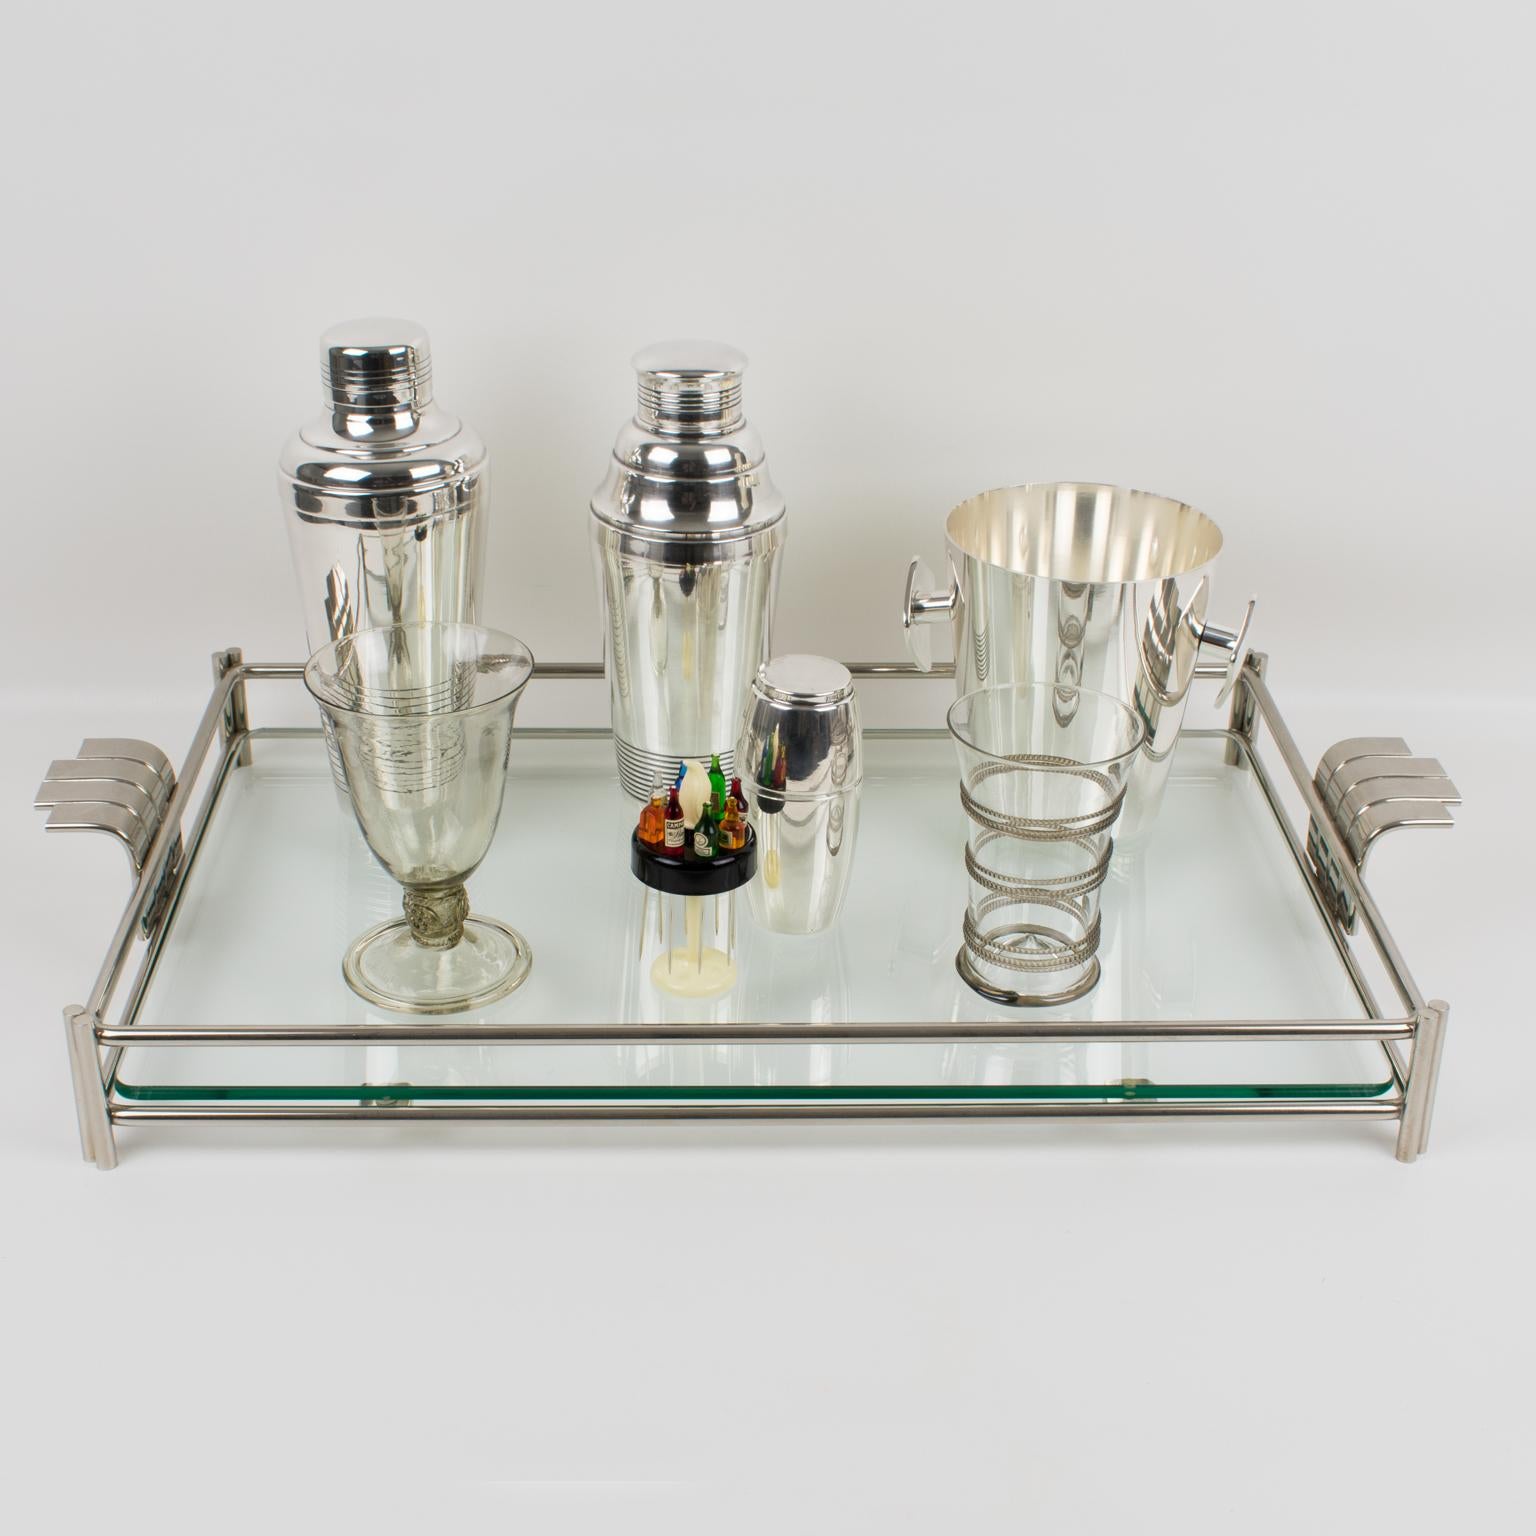 Modern Christian Dior Home Barware Silver Plate and Glass Serving Tray